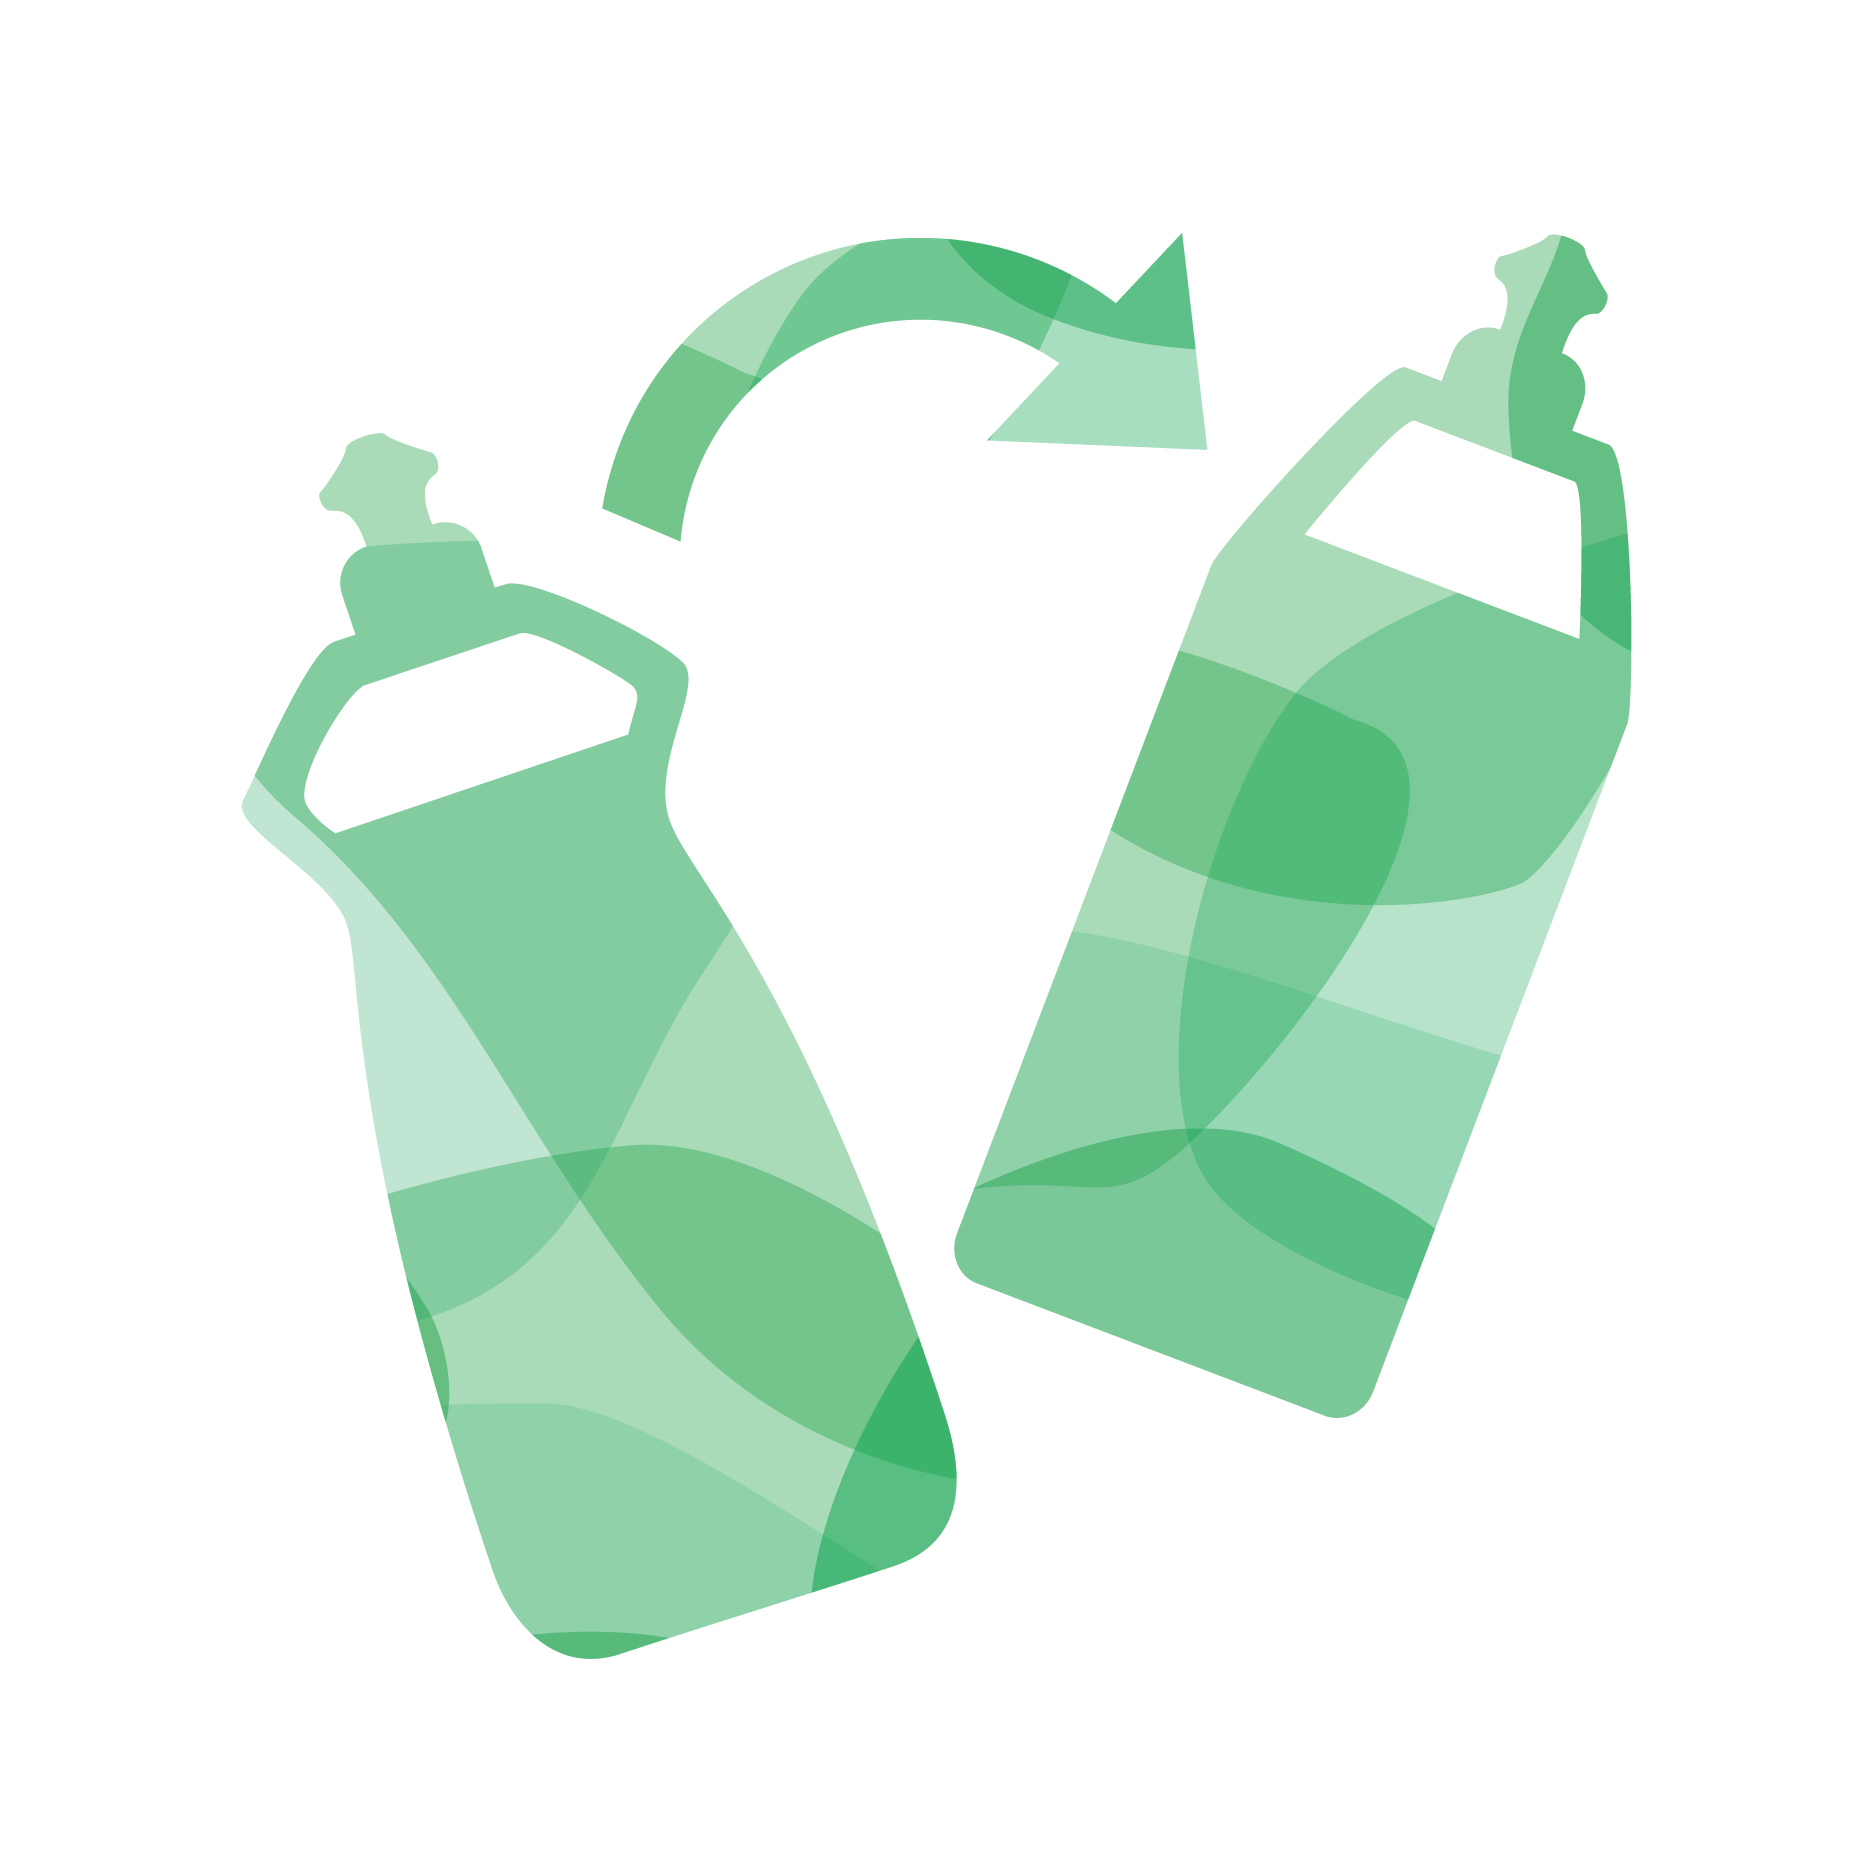 Illustration of two bottles with an arrow between them